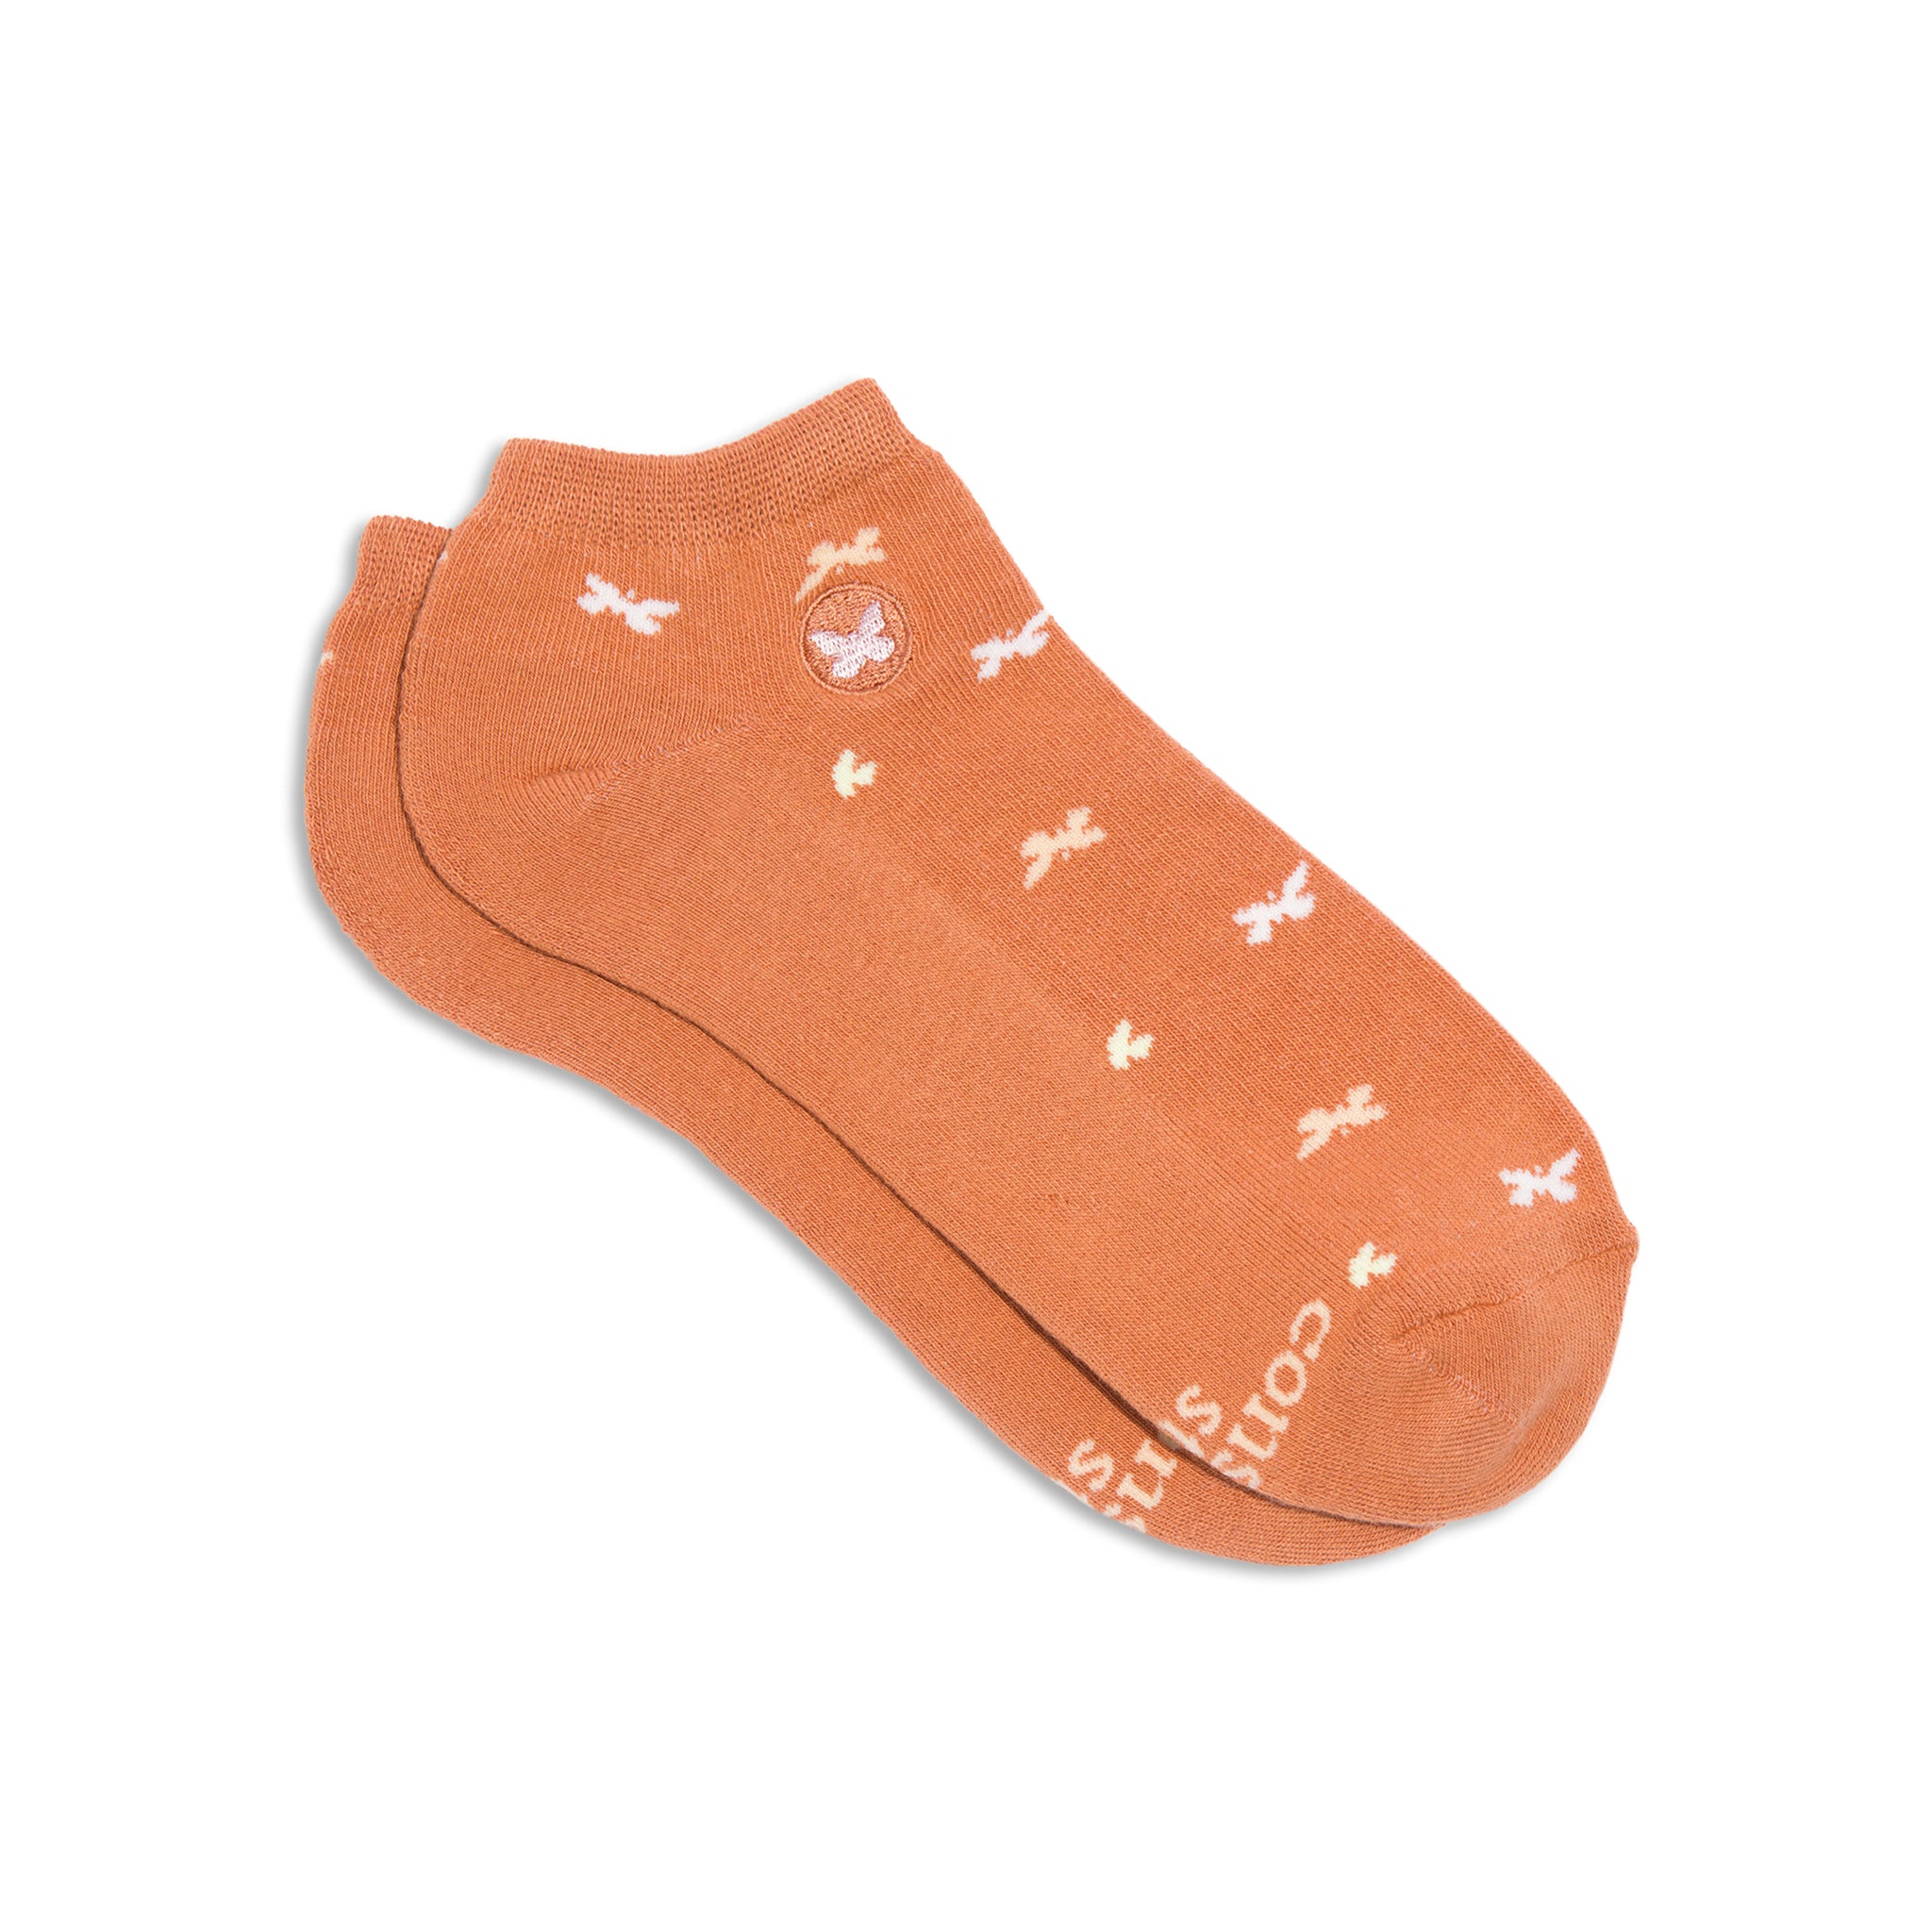 Conscious Step Women's Orange Flower Socks - Stop Violence Against Women by Humankind Fair Trade